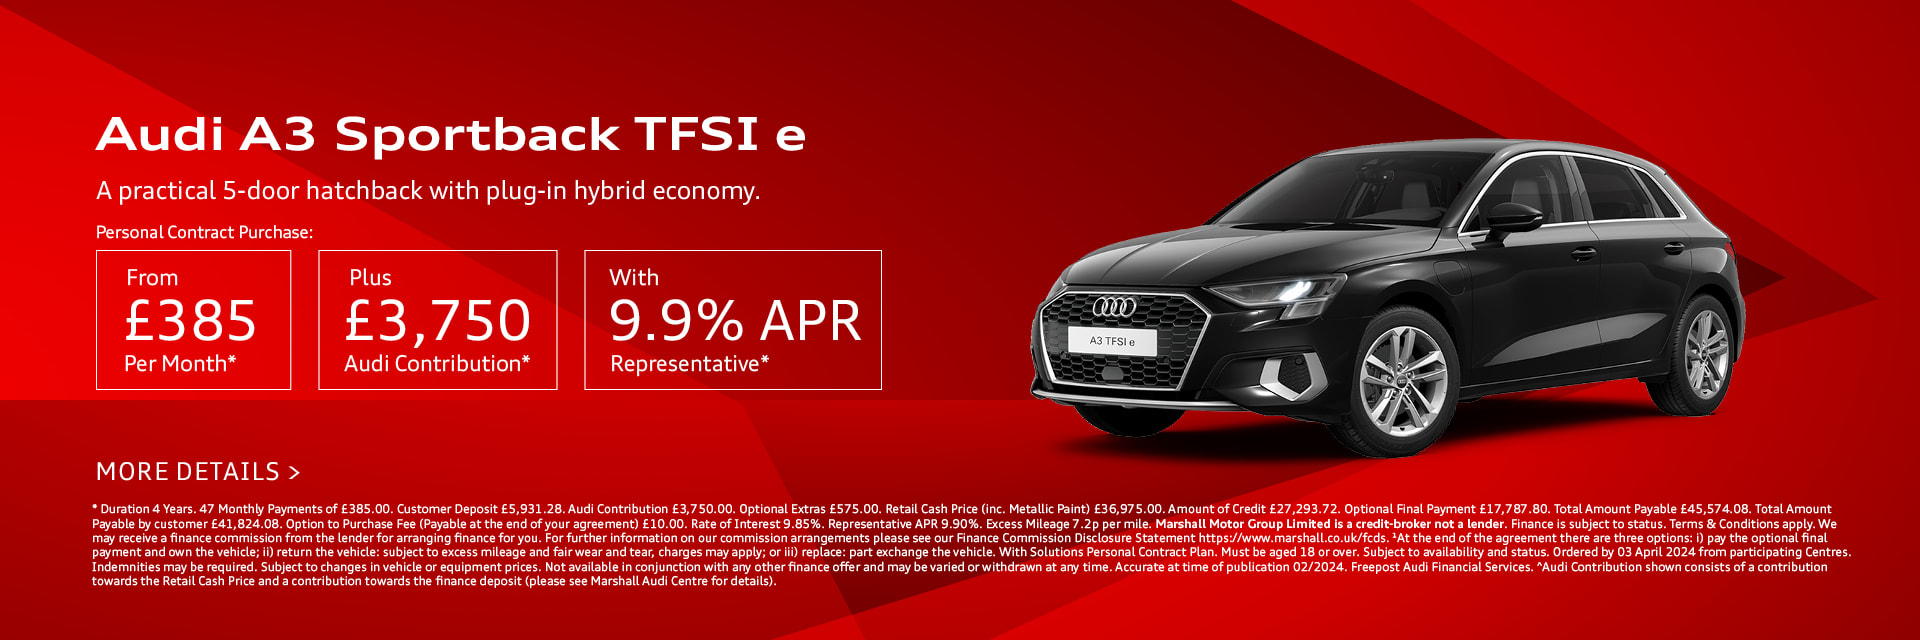 Audi A3 Sportback TFSI e Personal Contract Purchase Offer